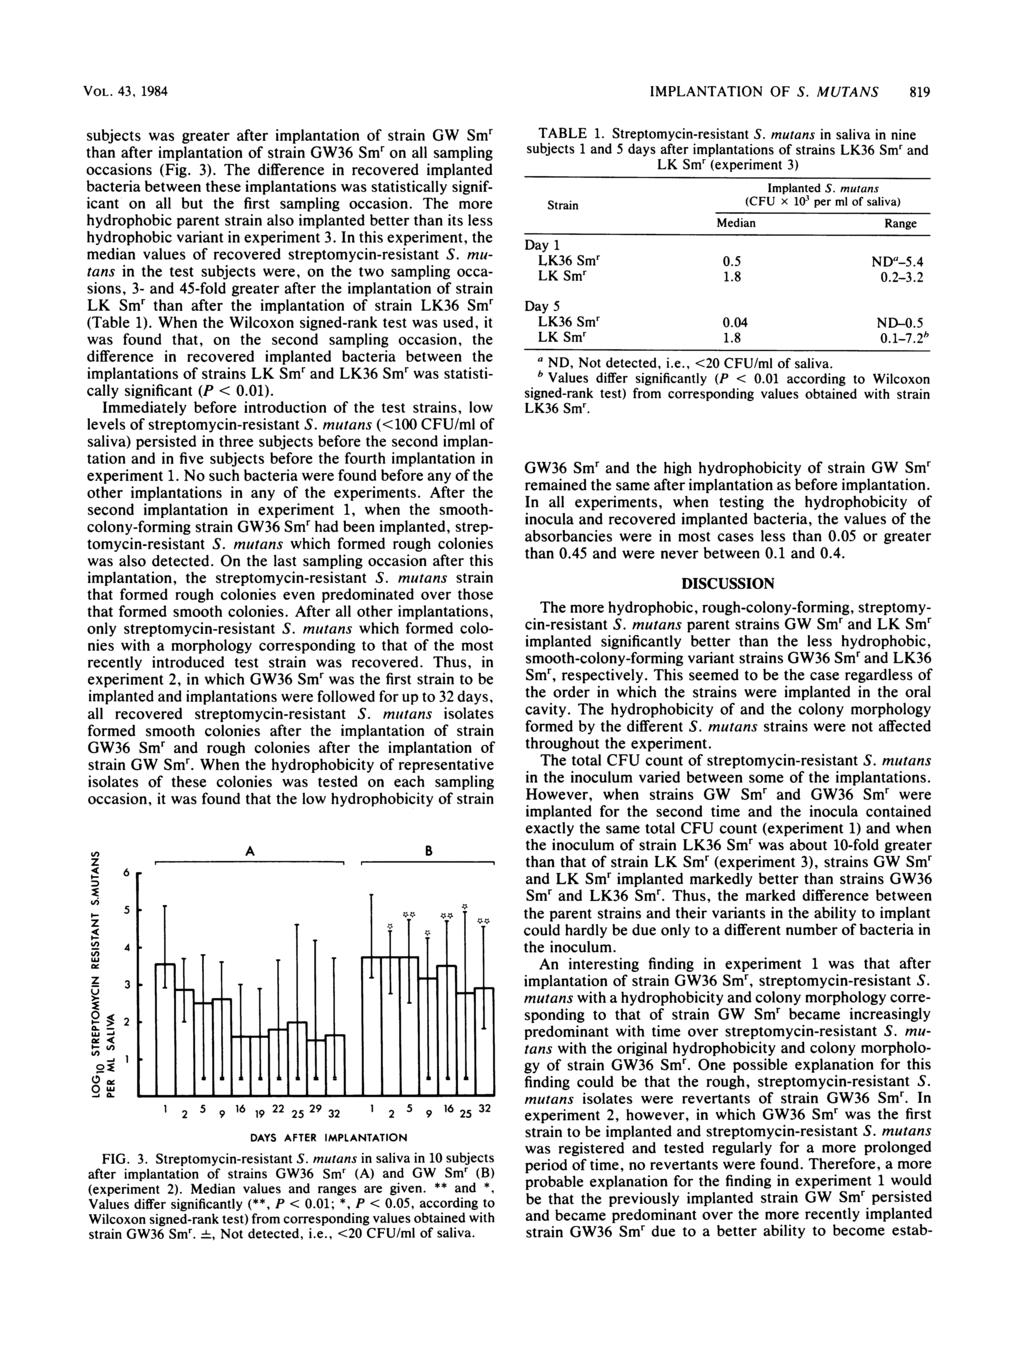 VOL. 43, 1984 subjects was greater after implantation of strain GW Smr than after implantation of strain GW36 Smr on all sampling occasions (Fig. 3).